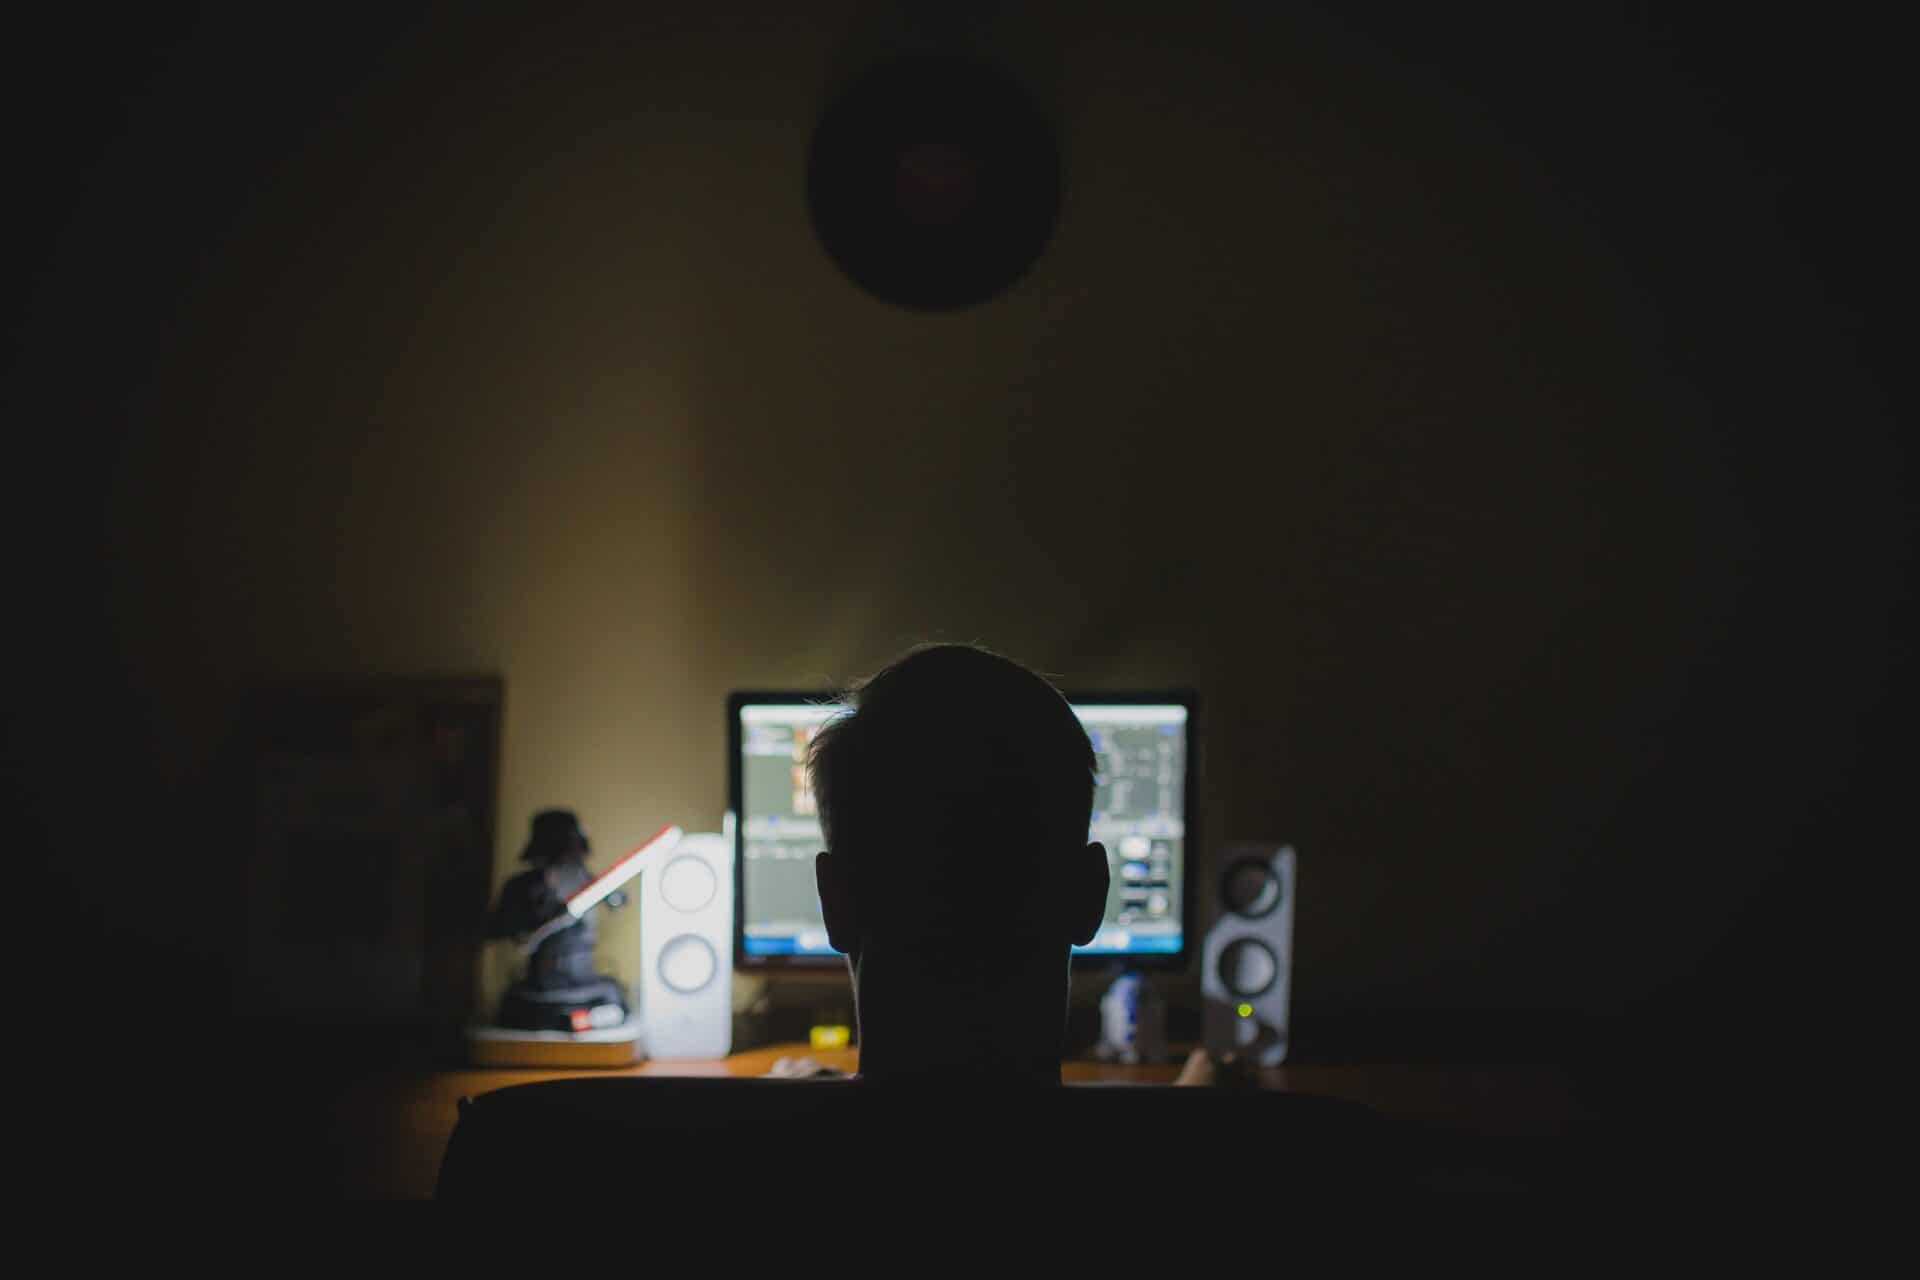 silhouette of man at computer